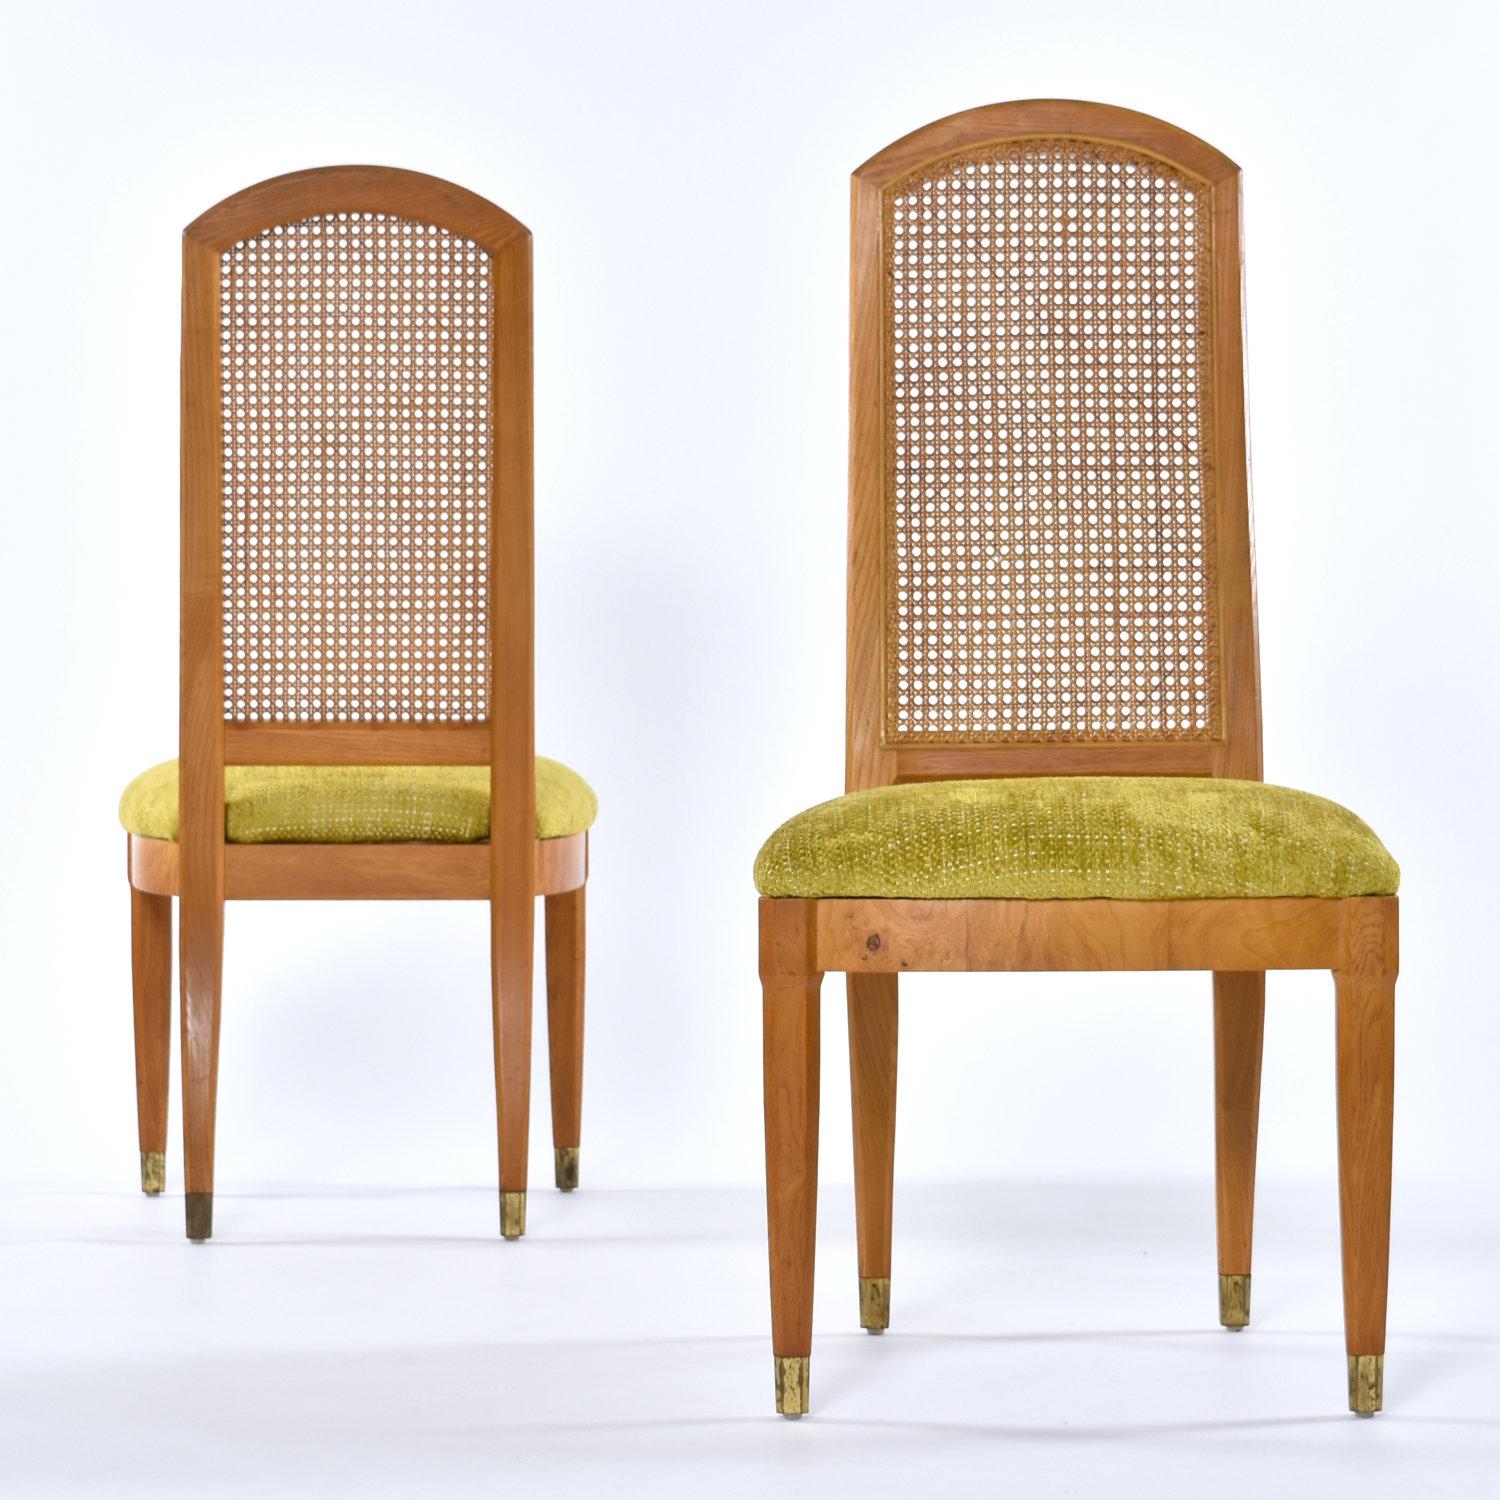 Handsome set of four Henredon burl wood dining chairs with caned backs. The vintage 1970s dining chairs are ash wood with ash burl accent along the seat trim. The chair seats have been restored with new chartreuse green upholstery and decking. The